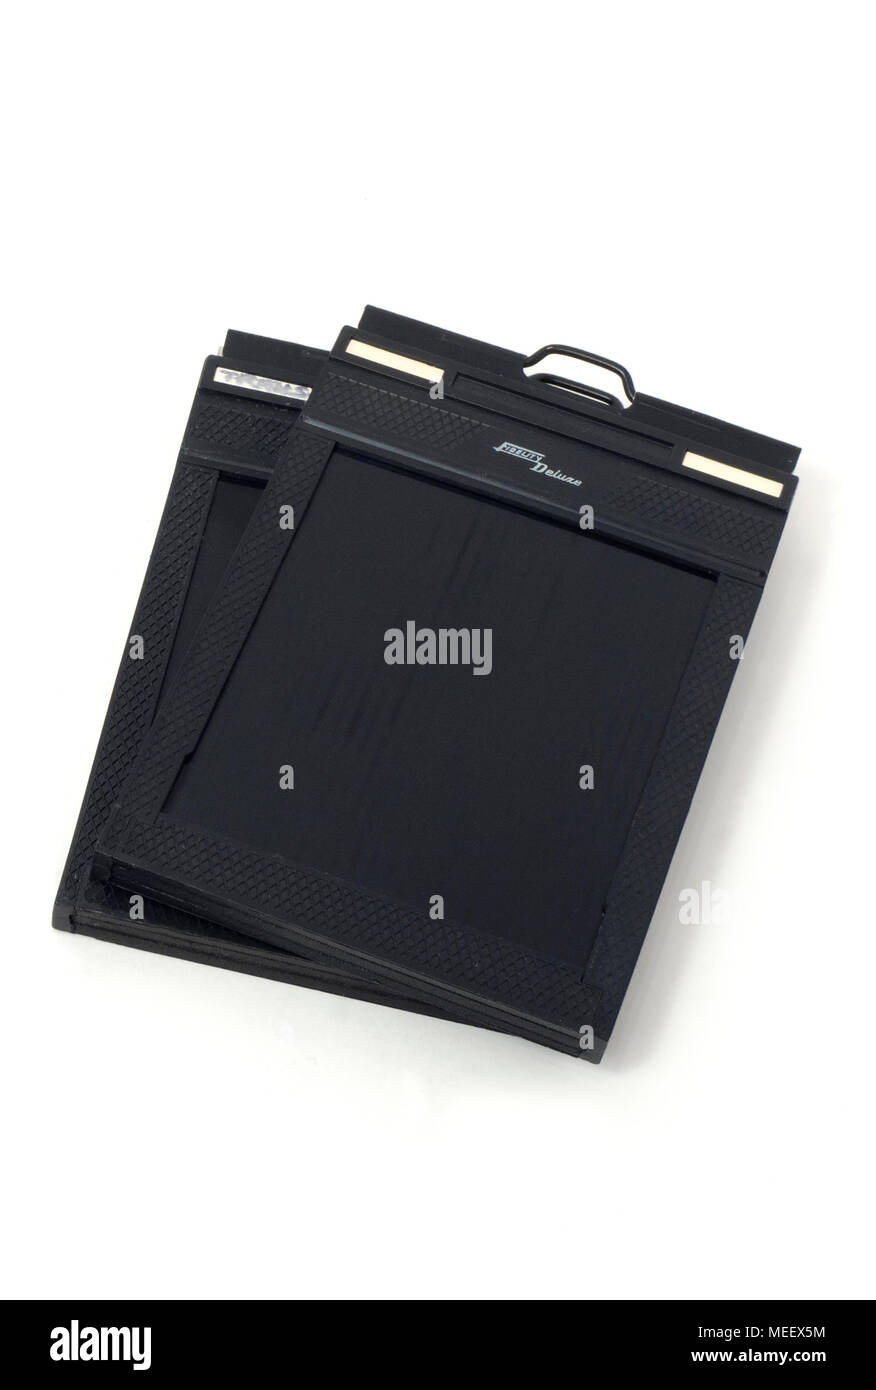 Fidelity Deluxe 4x5' large format film holders. Stock Photo